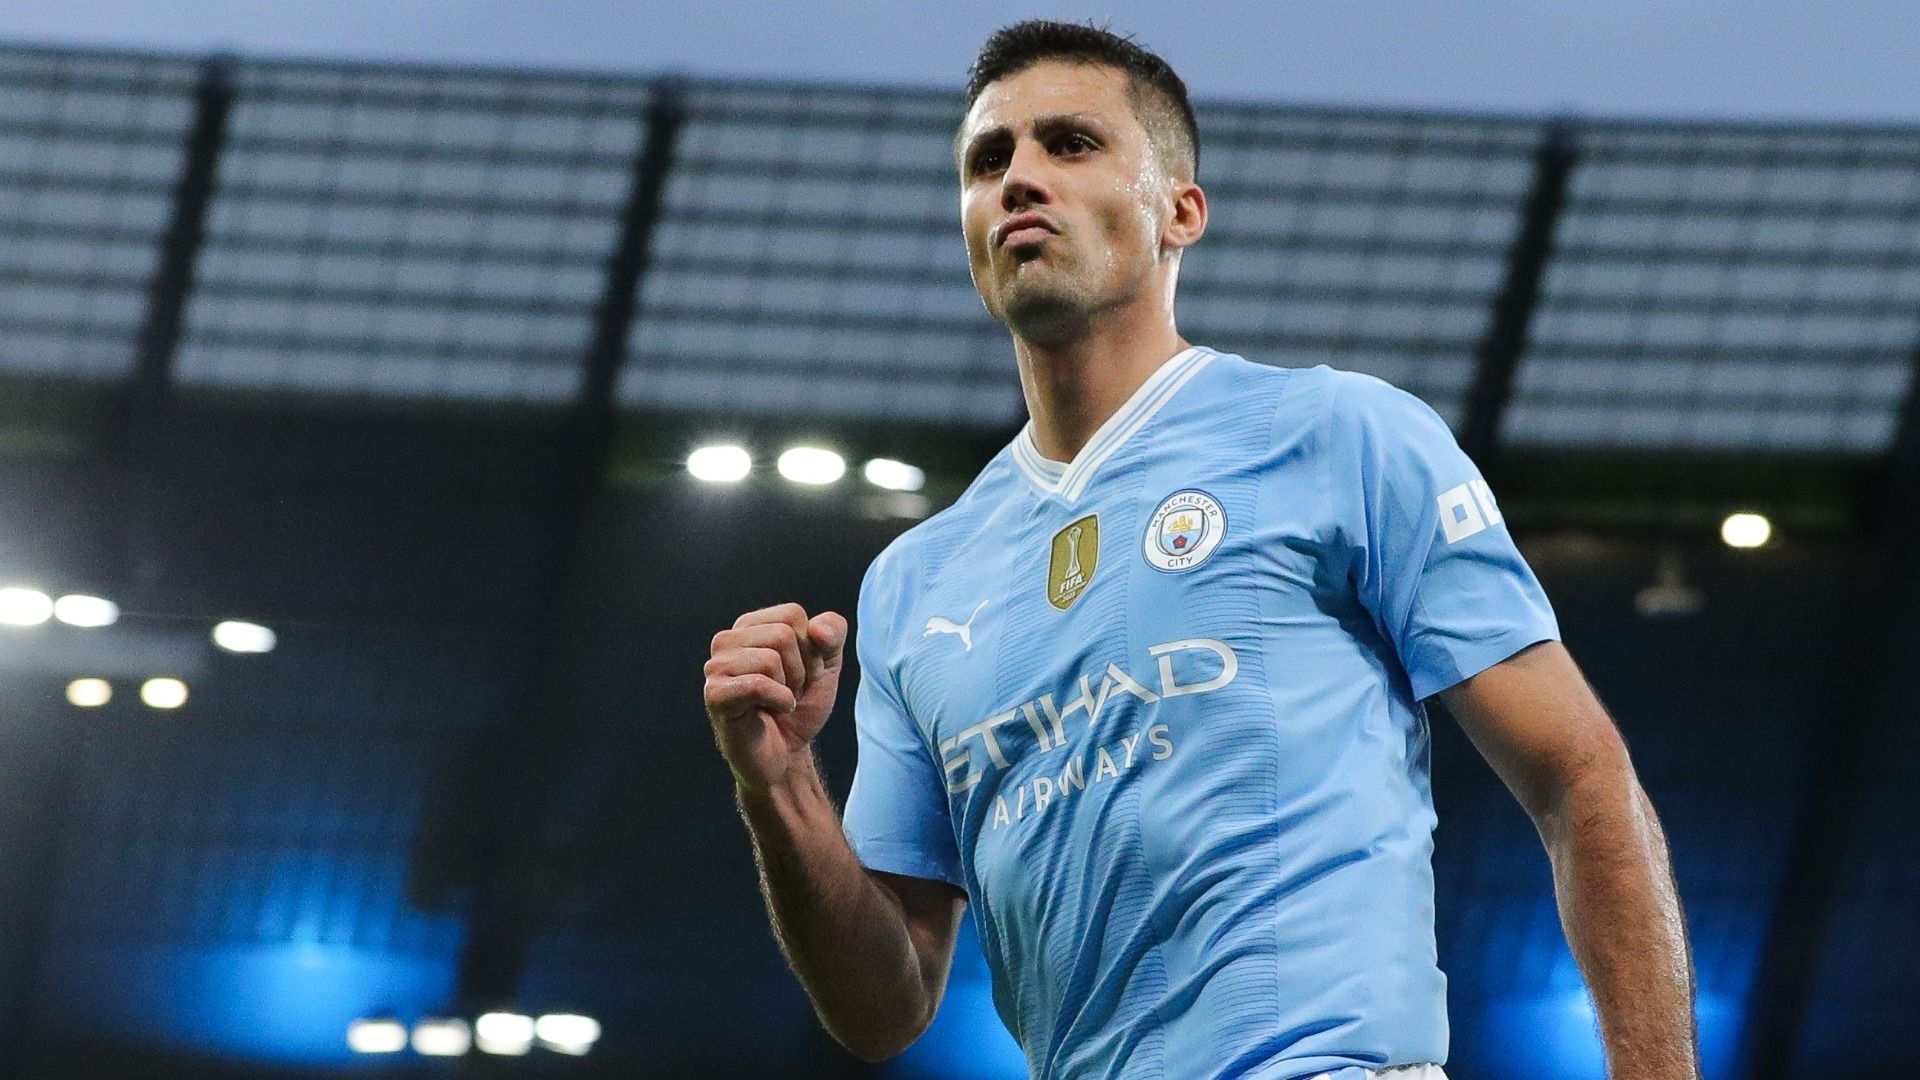 Man City Midfielder Rodri Says He Saw Only One Team In Match With Real Madrid